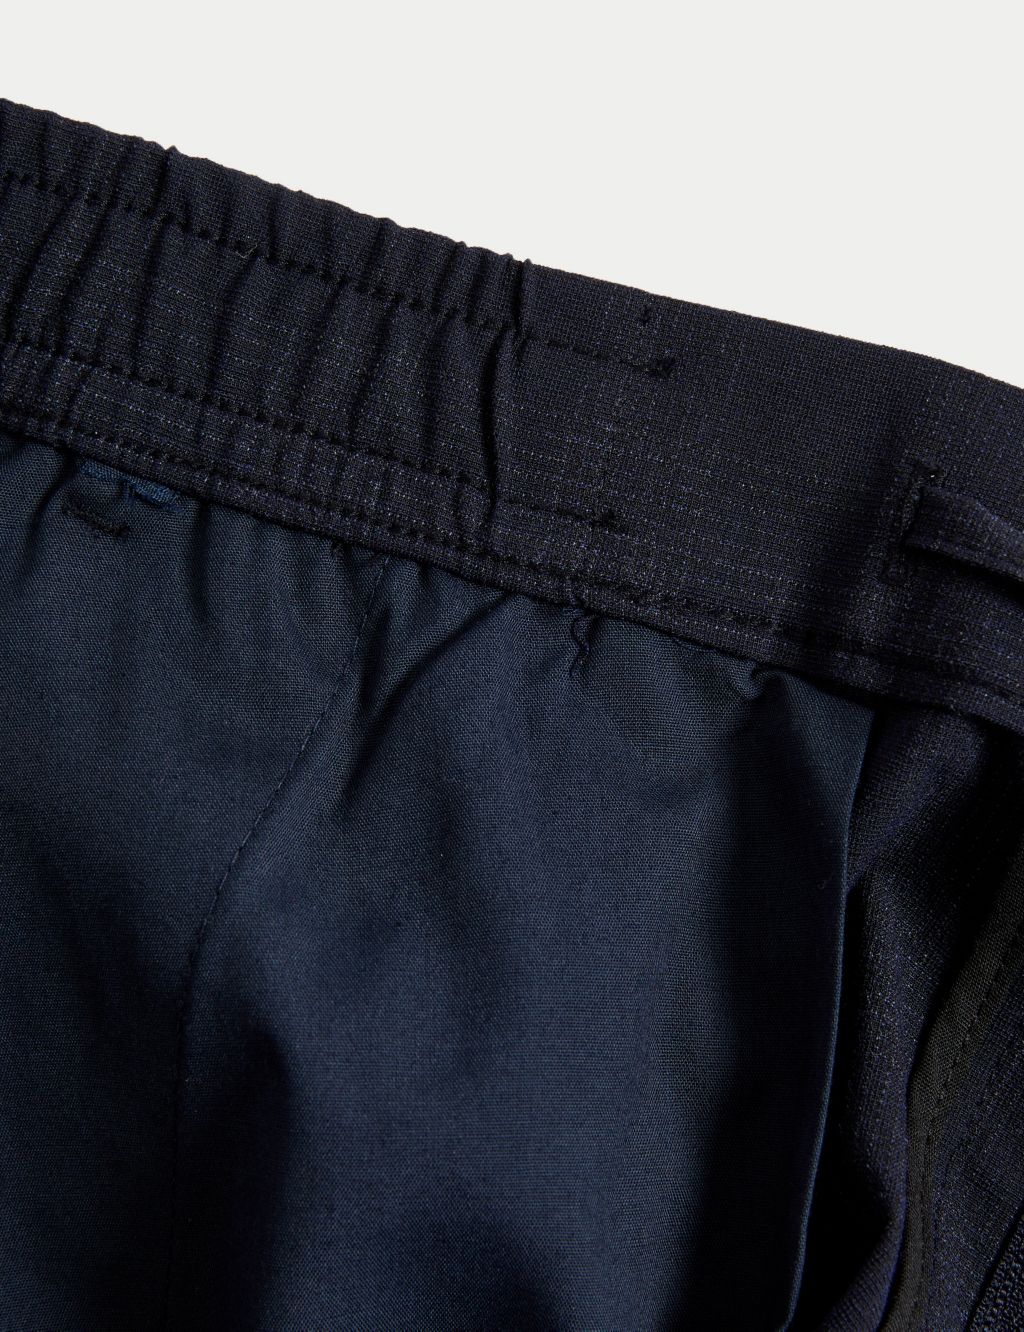 Check Single Pleat Elasticated Trousers image 7